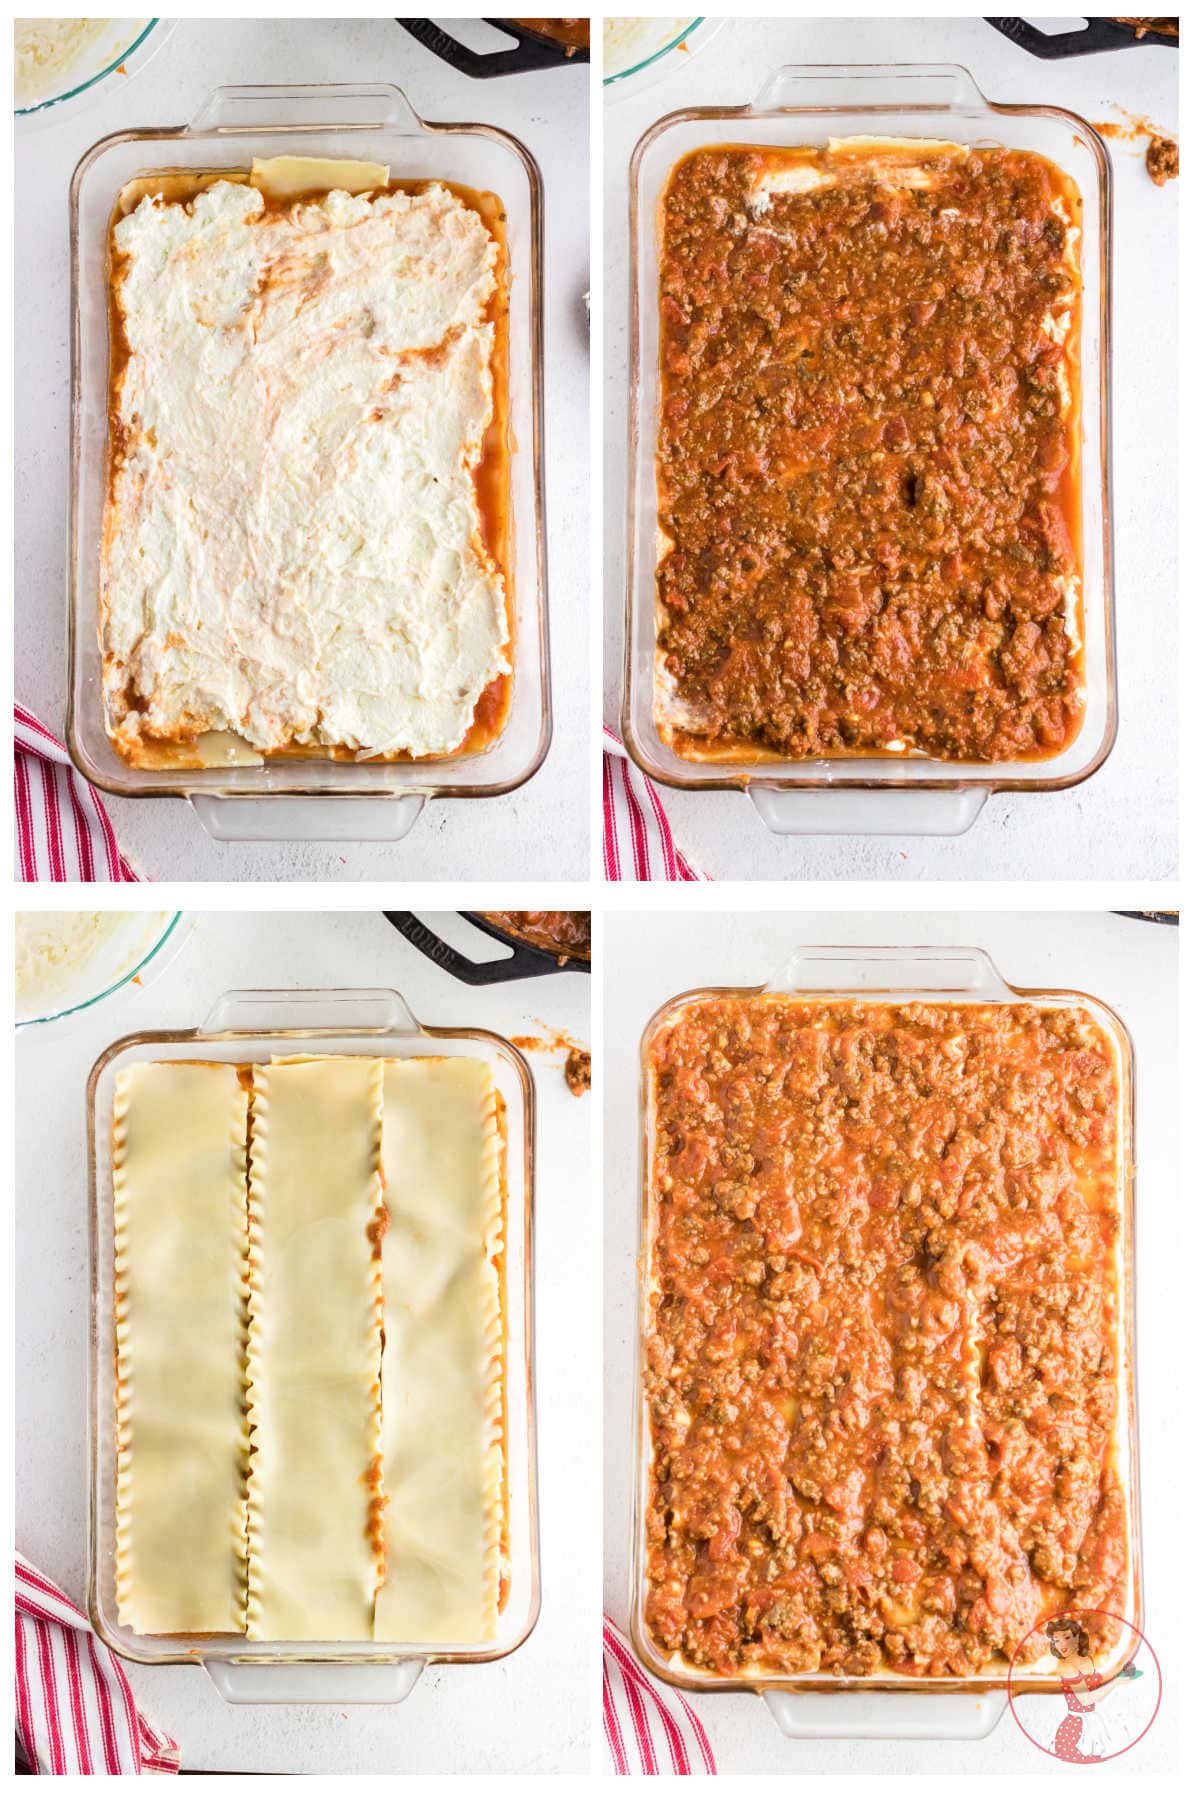 Step by step images showing how to make lasagna.